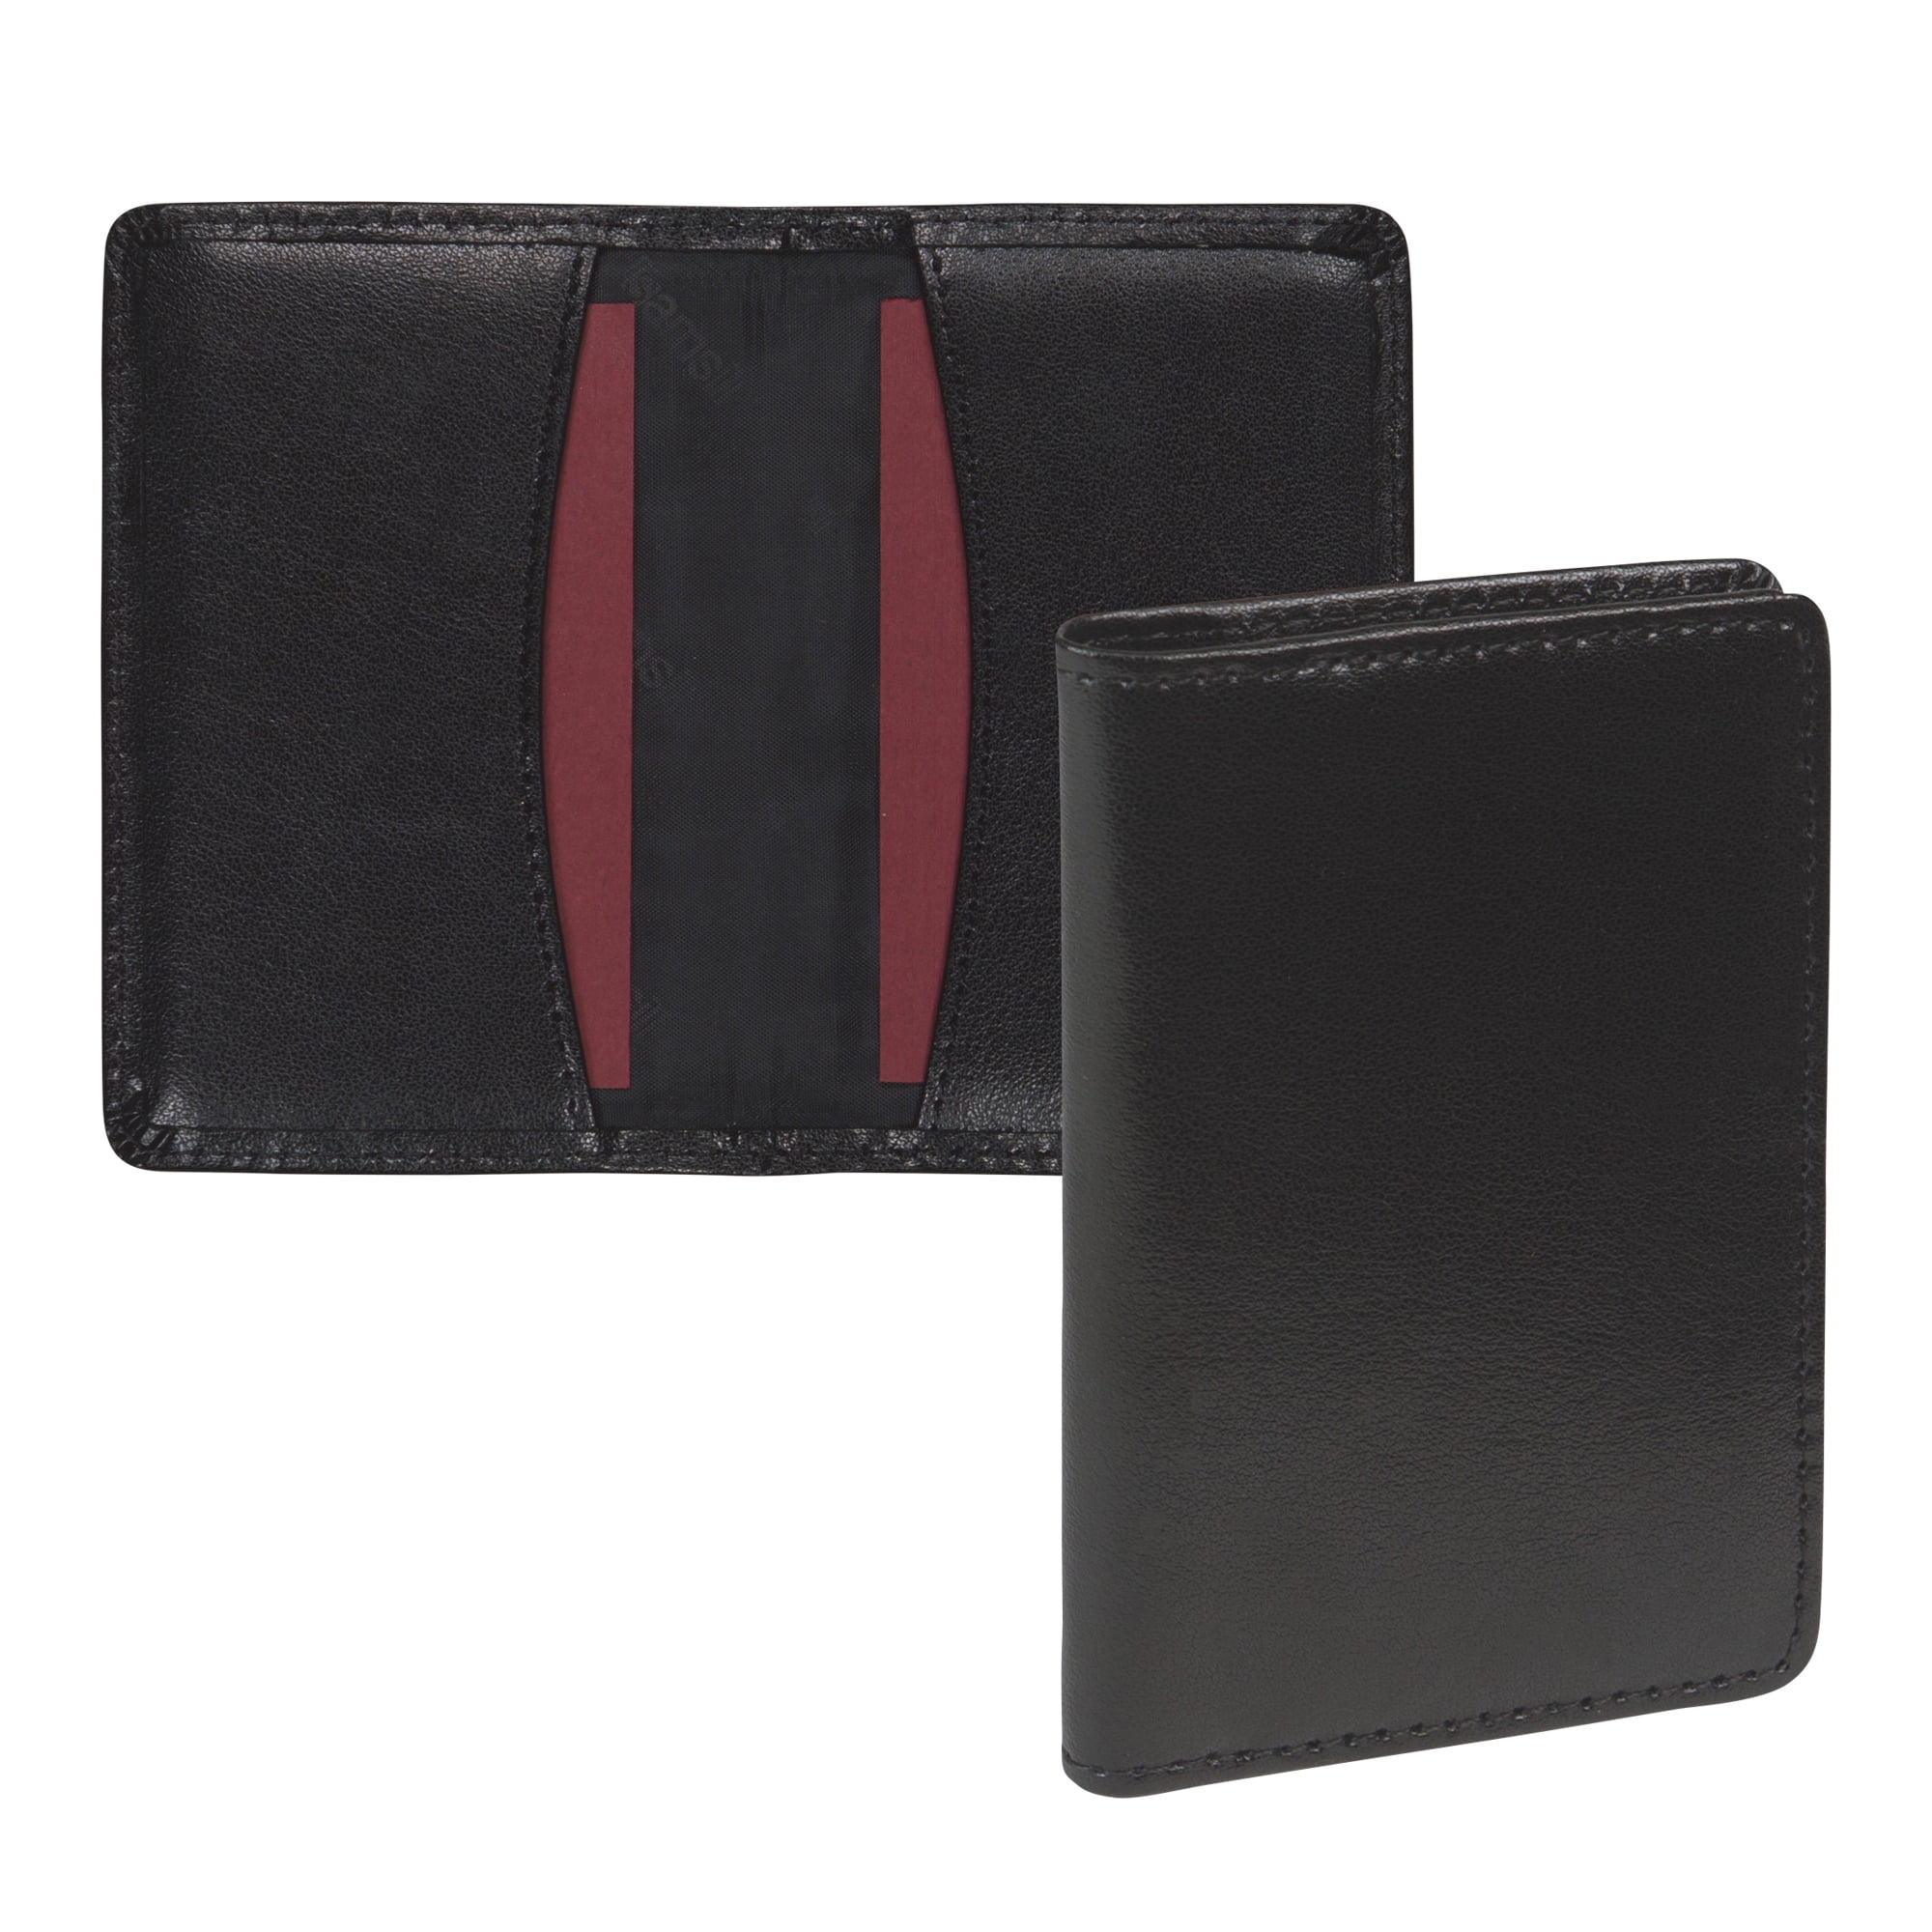 Money Clip Wallet & Card Holder - 8 Cards - Royal Blue - Granulated Leather